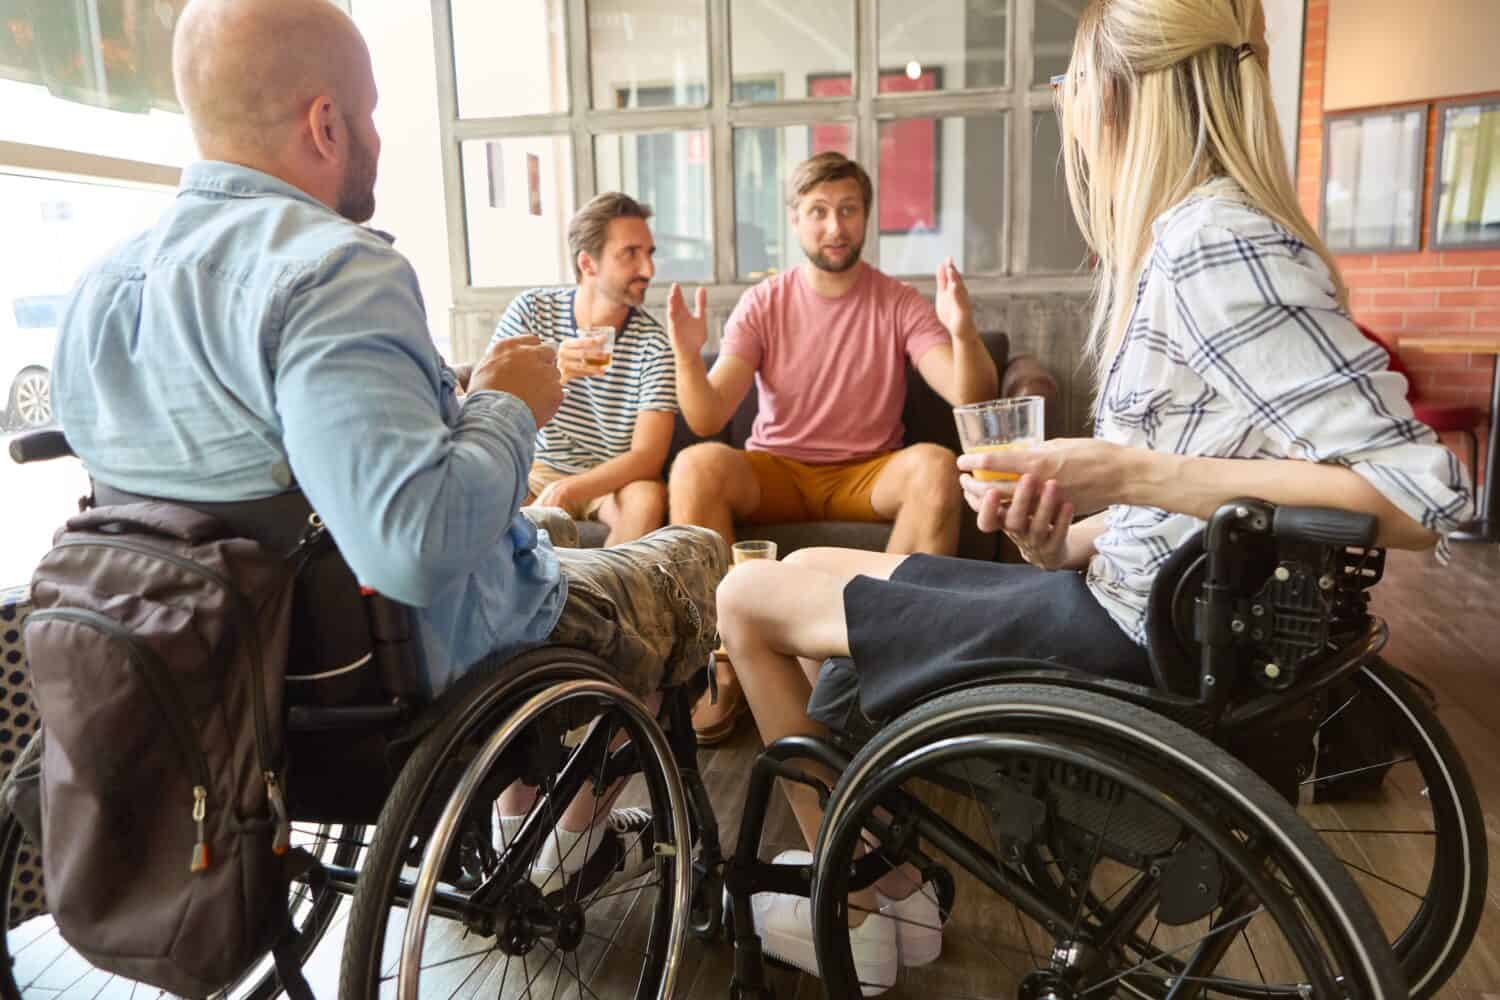 A group of friends, including people who use wheelchairs, engaged in lively conversation and enjoying drinks together in a sunny café setting.